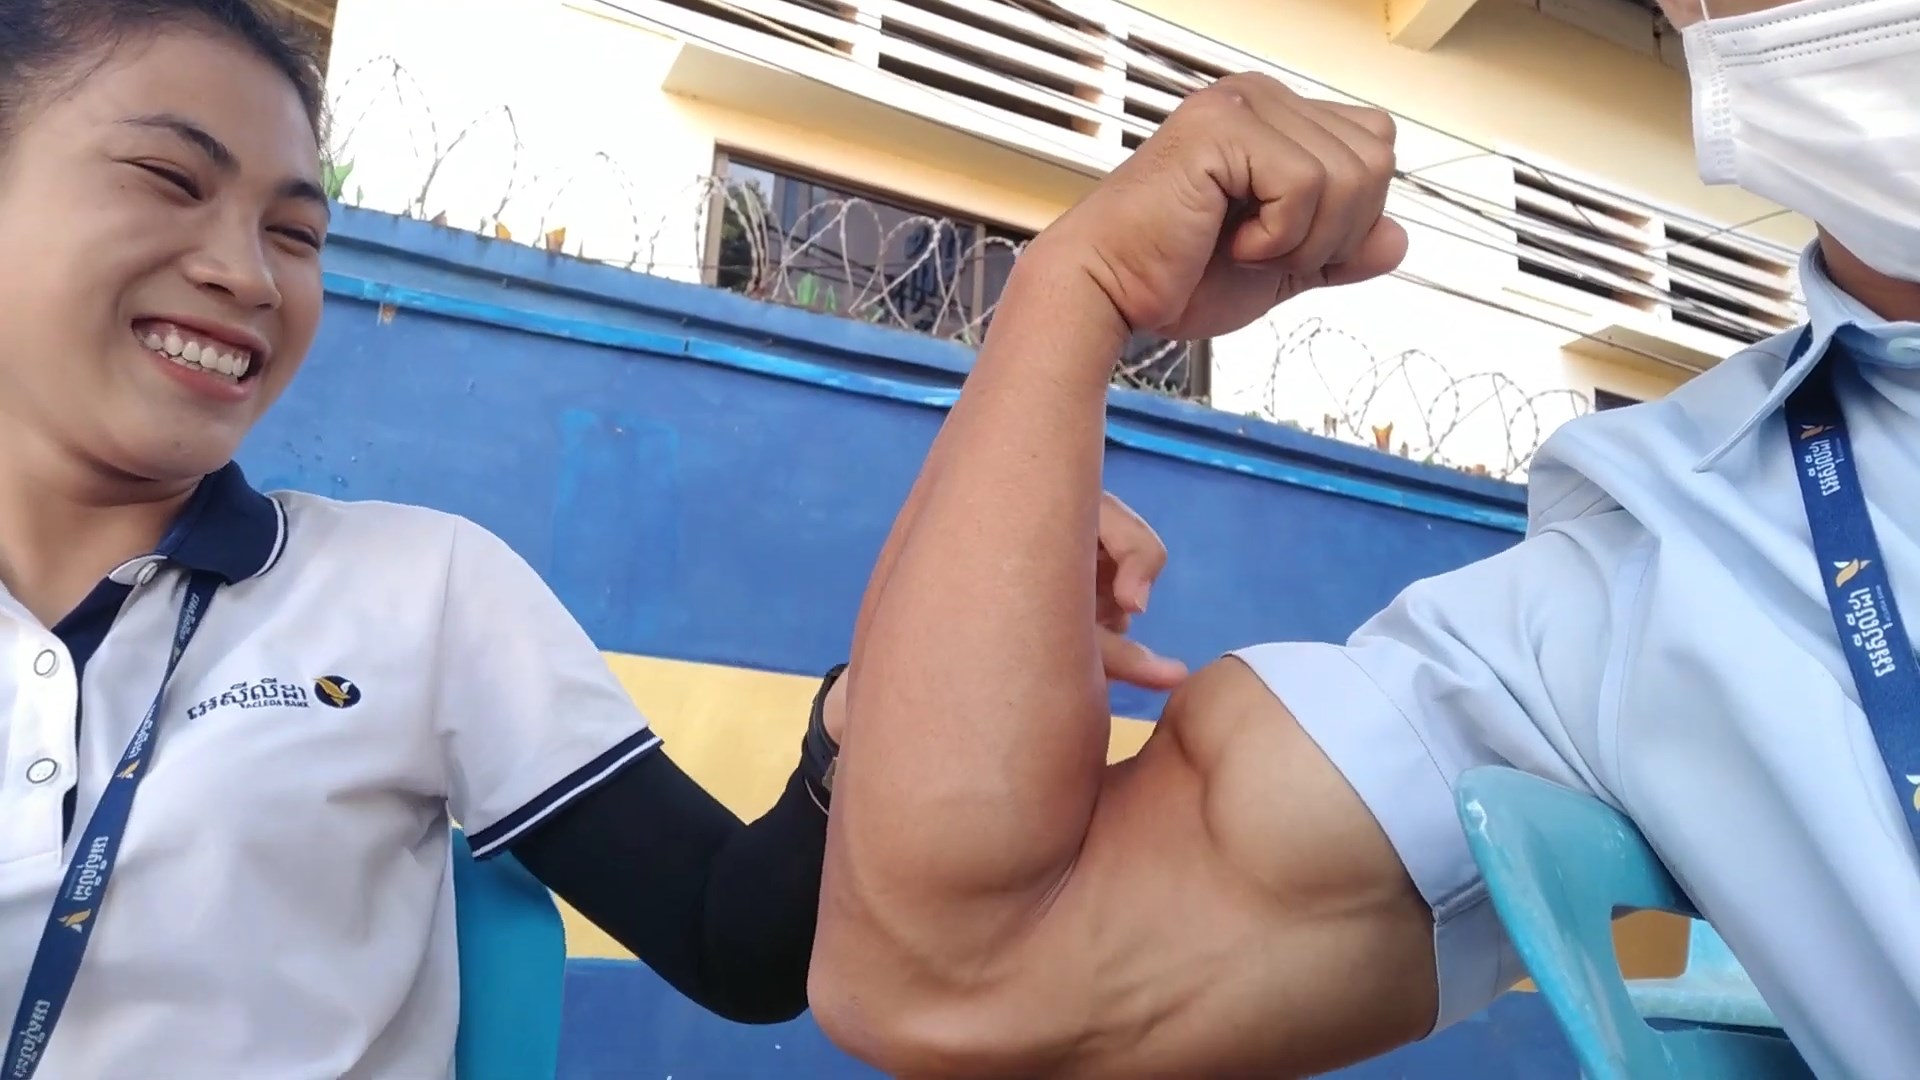 Public Reation to big biceps